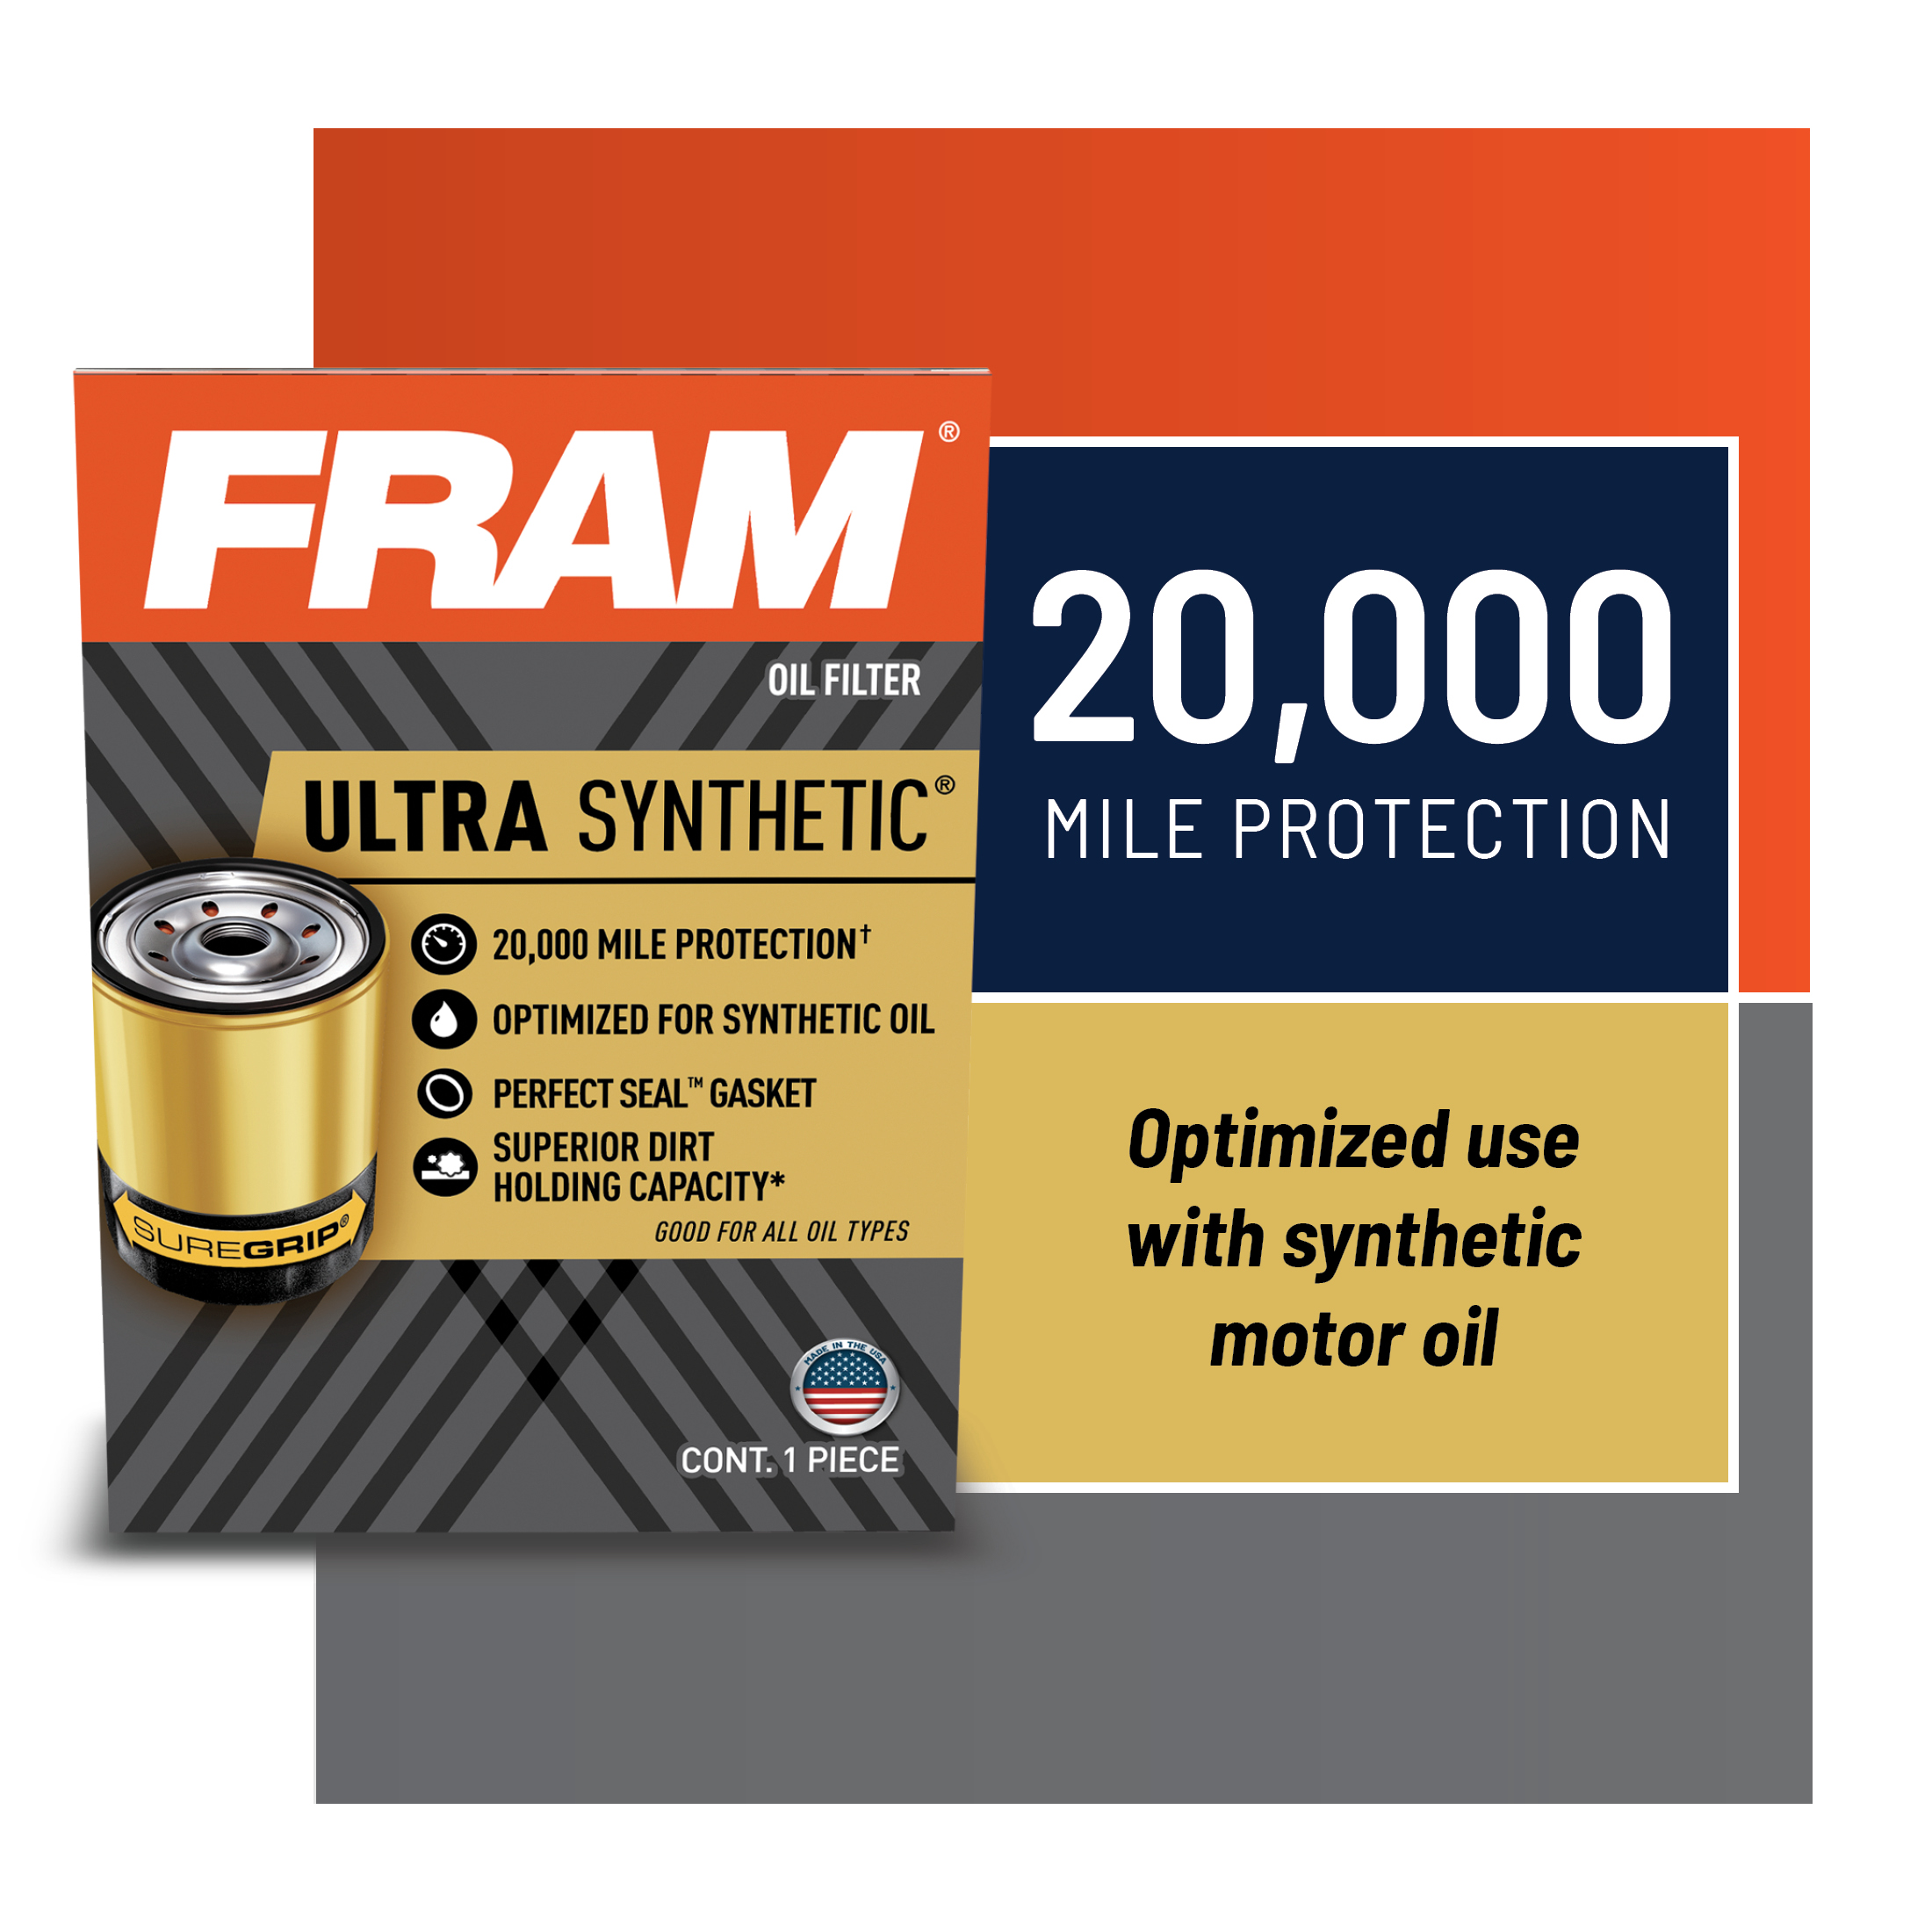 FRAM Ultra Synthetic Oil Filter, XG3614, 20K mile Replacement Engine Oil Filter for Select Ford Vehicles - image 3 of 10